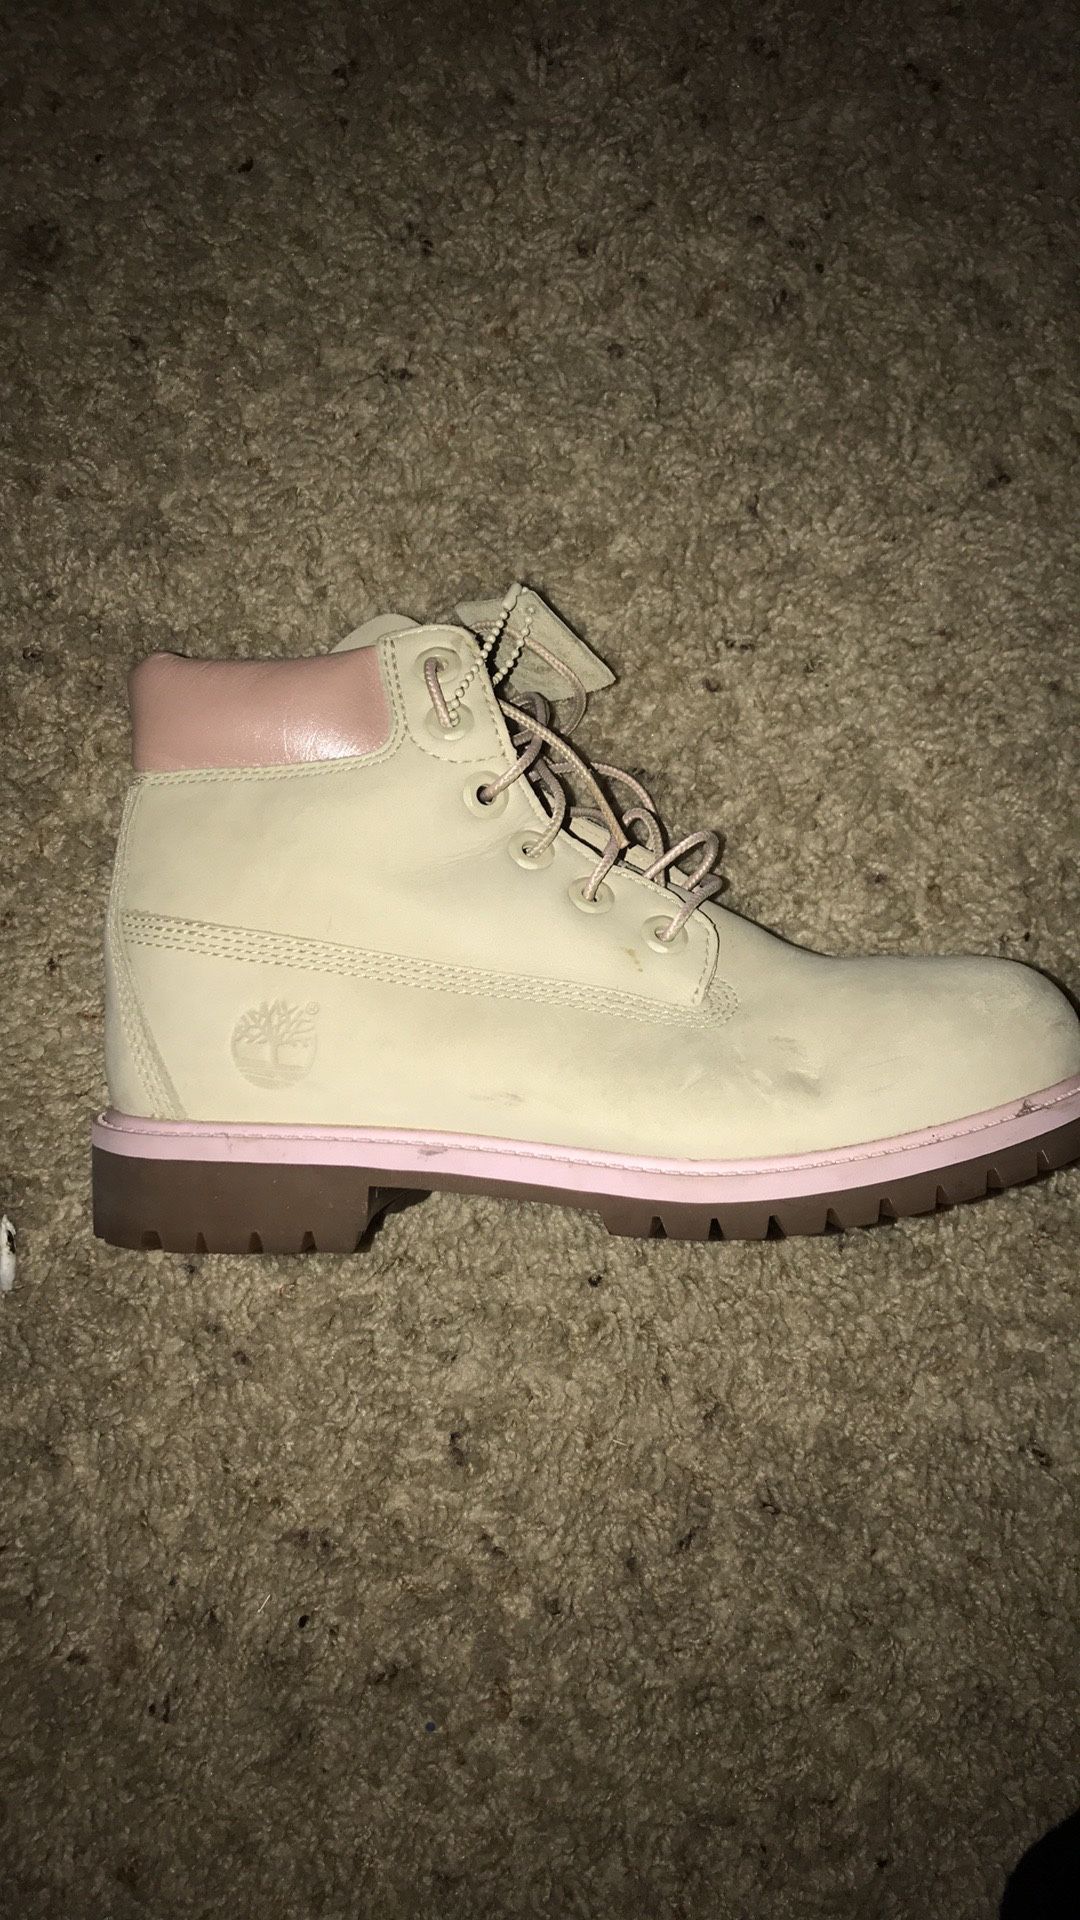 Heritage Timberland Boots